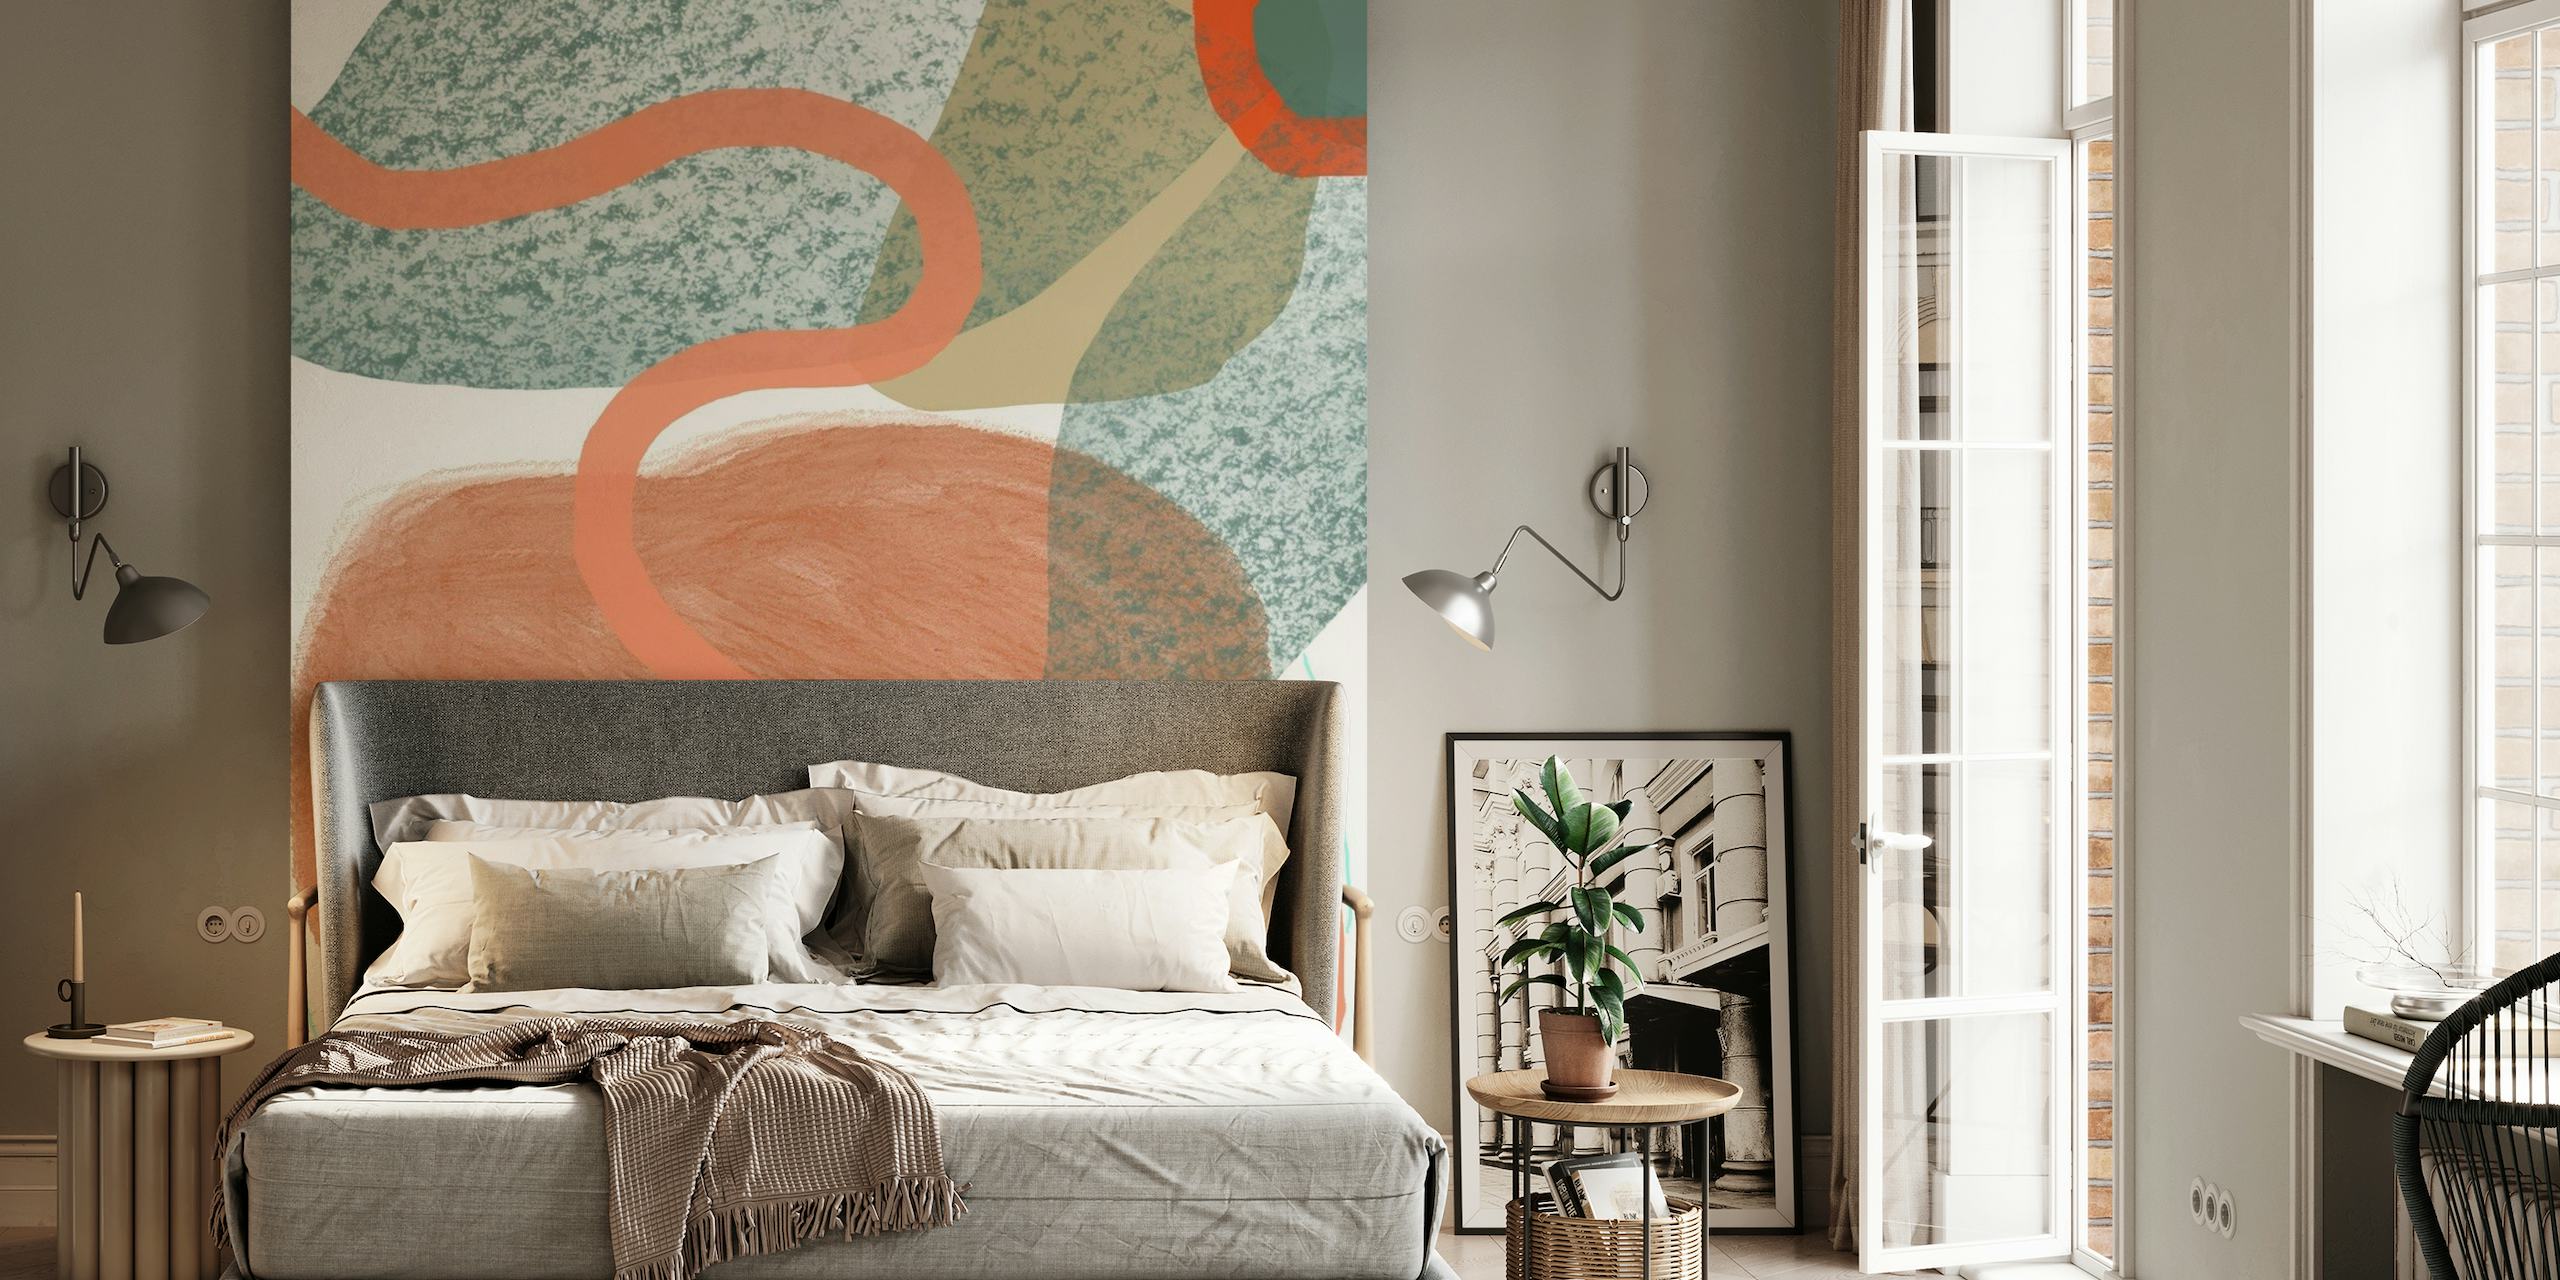 Abstract wall mural with organic shapes and earth tones